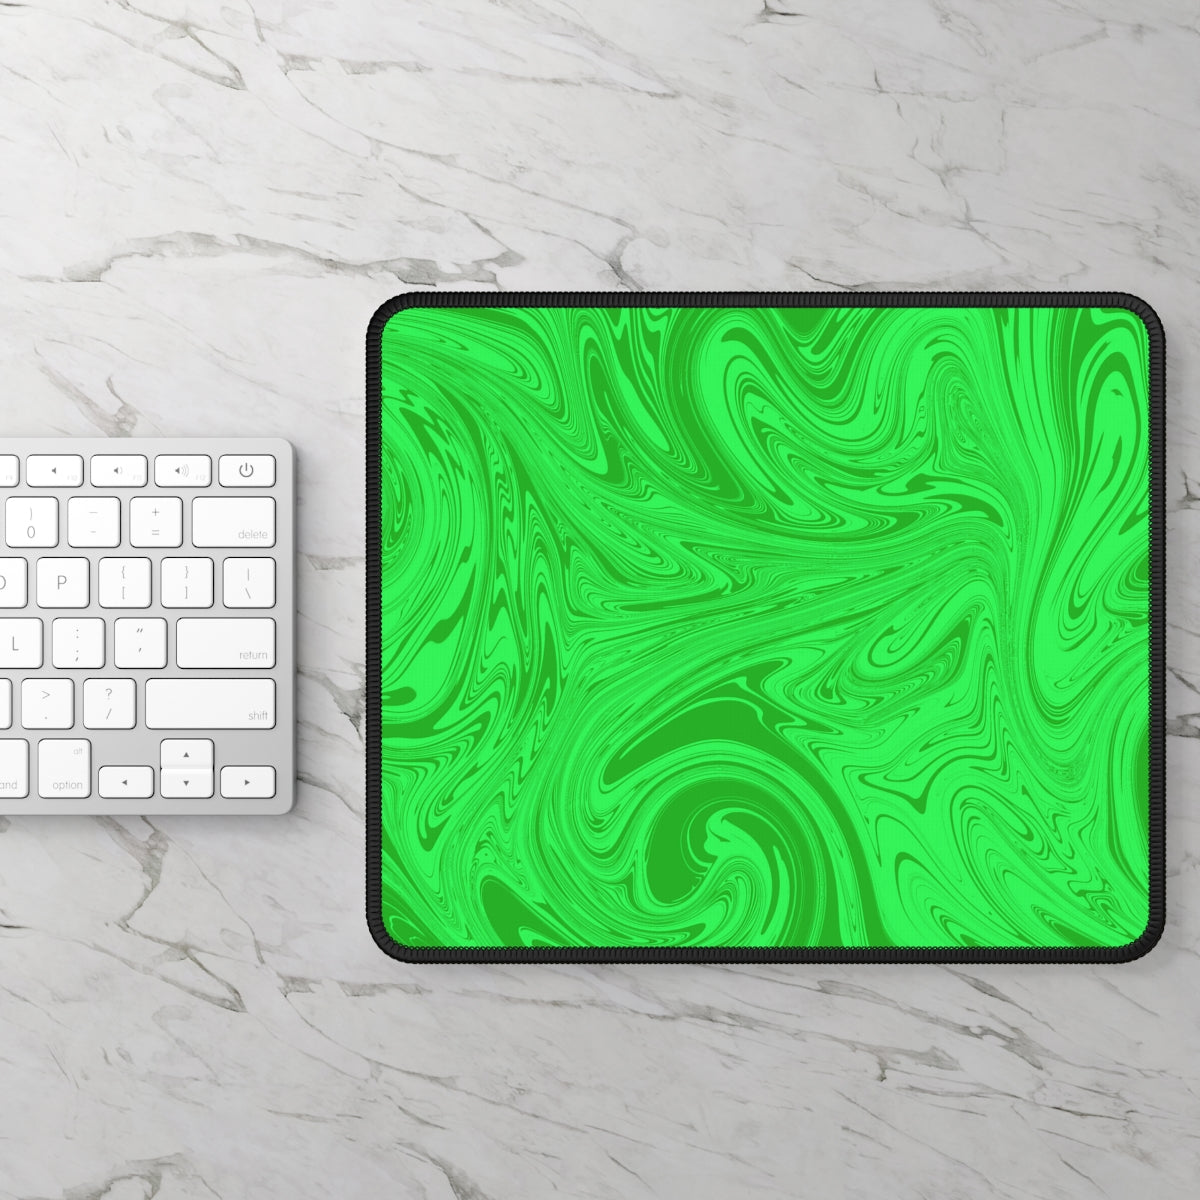 Green Swirl Gaming Mouse Pad - Desk Cookies